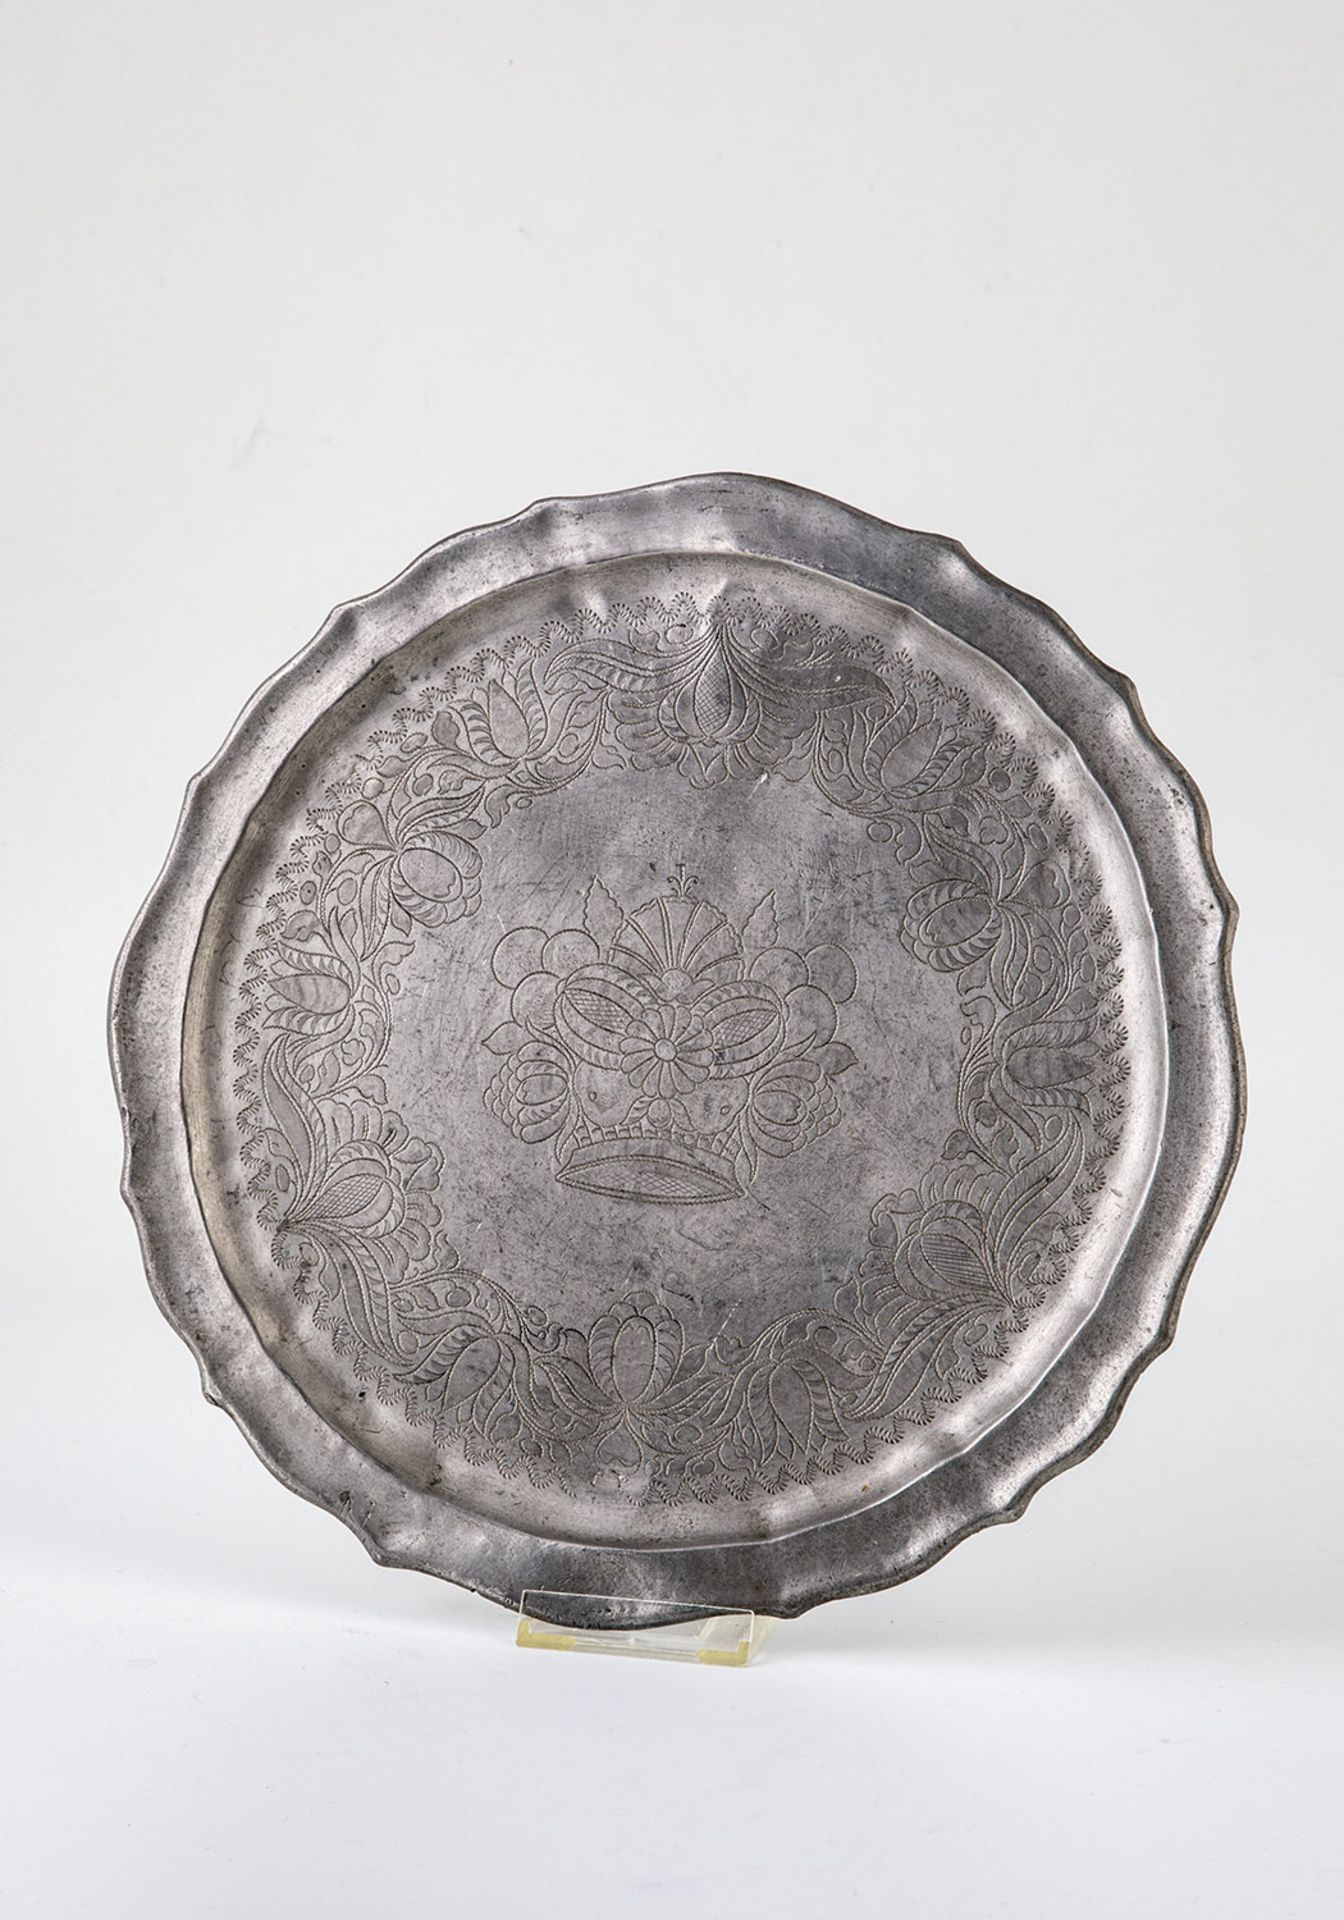 Plate and three plates from pewter - Image 2 of 4